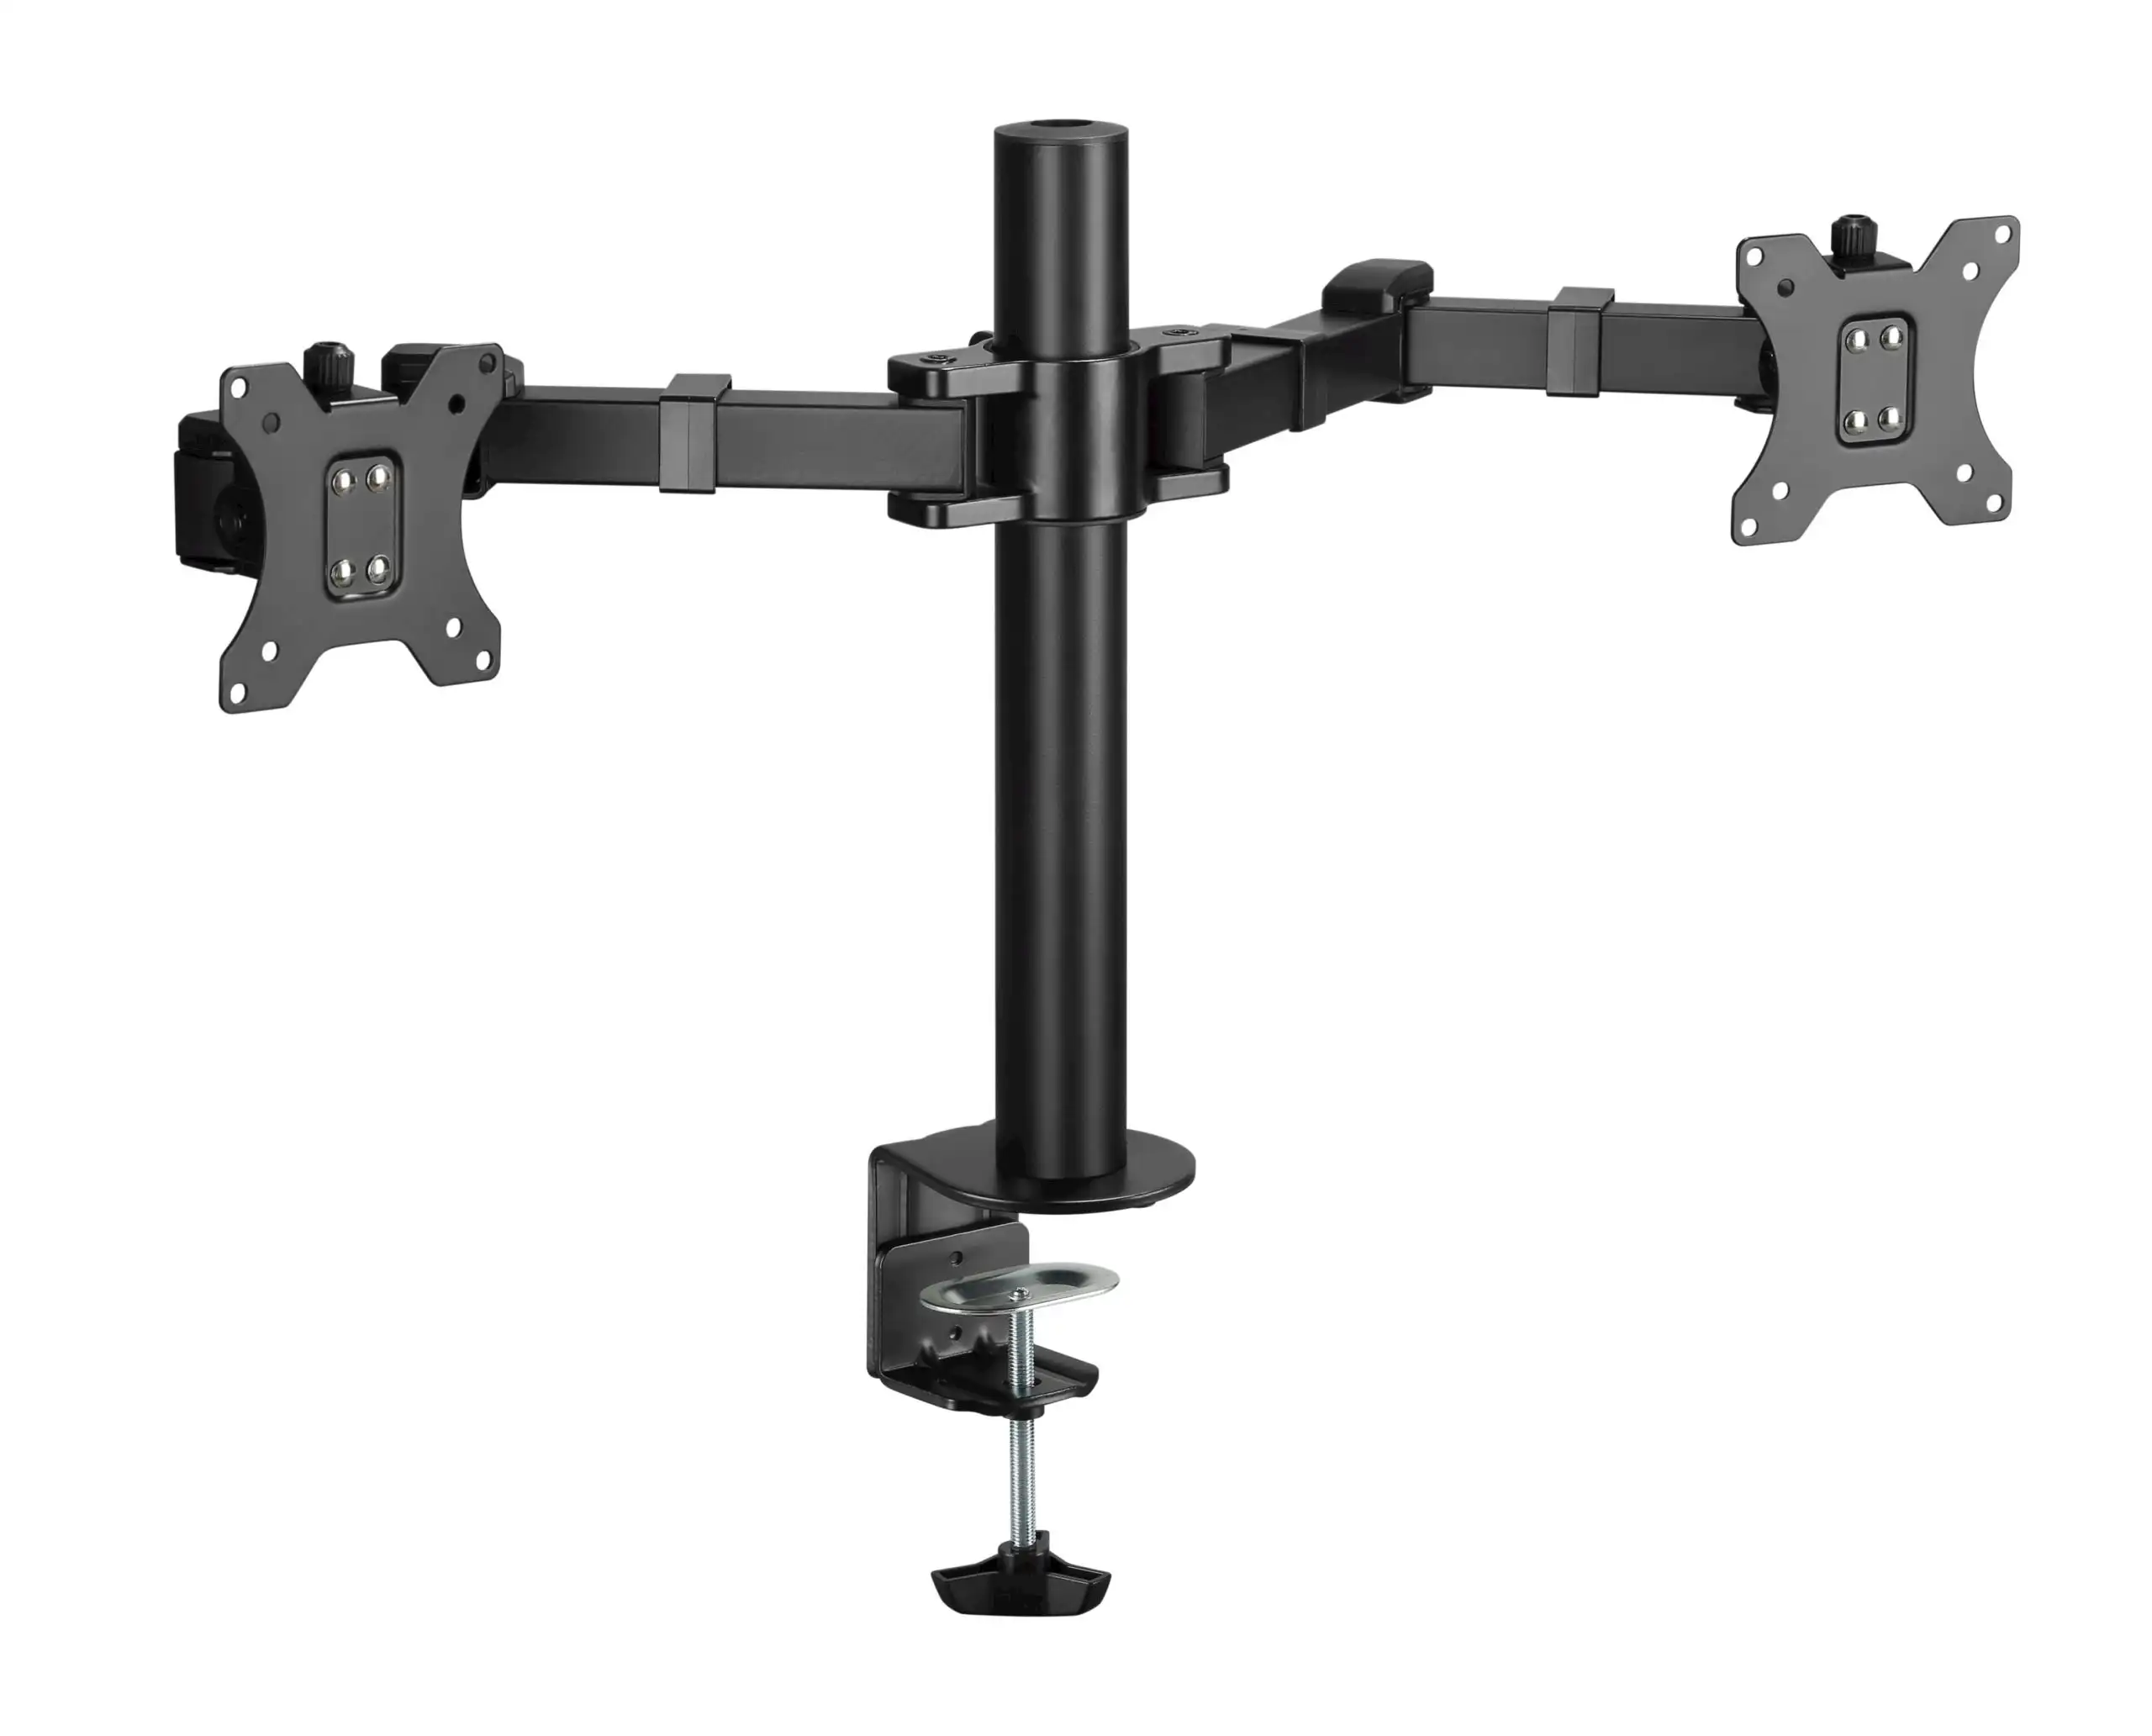 Brateck Affordable Steel Articulating Dual Monitor Arm - Black